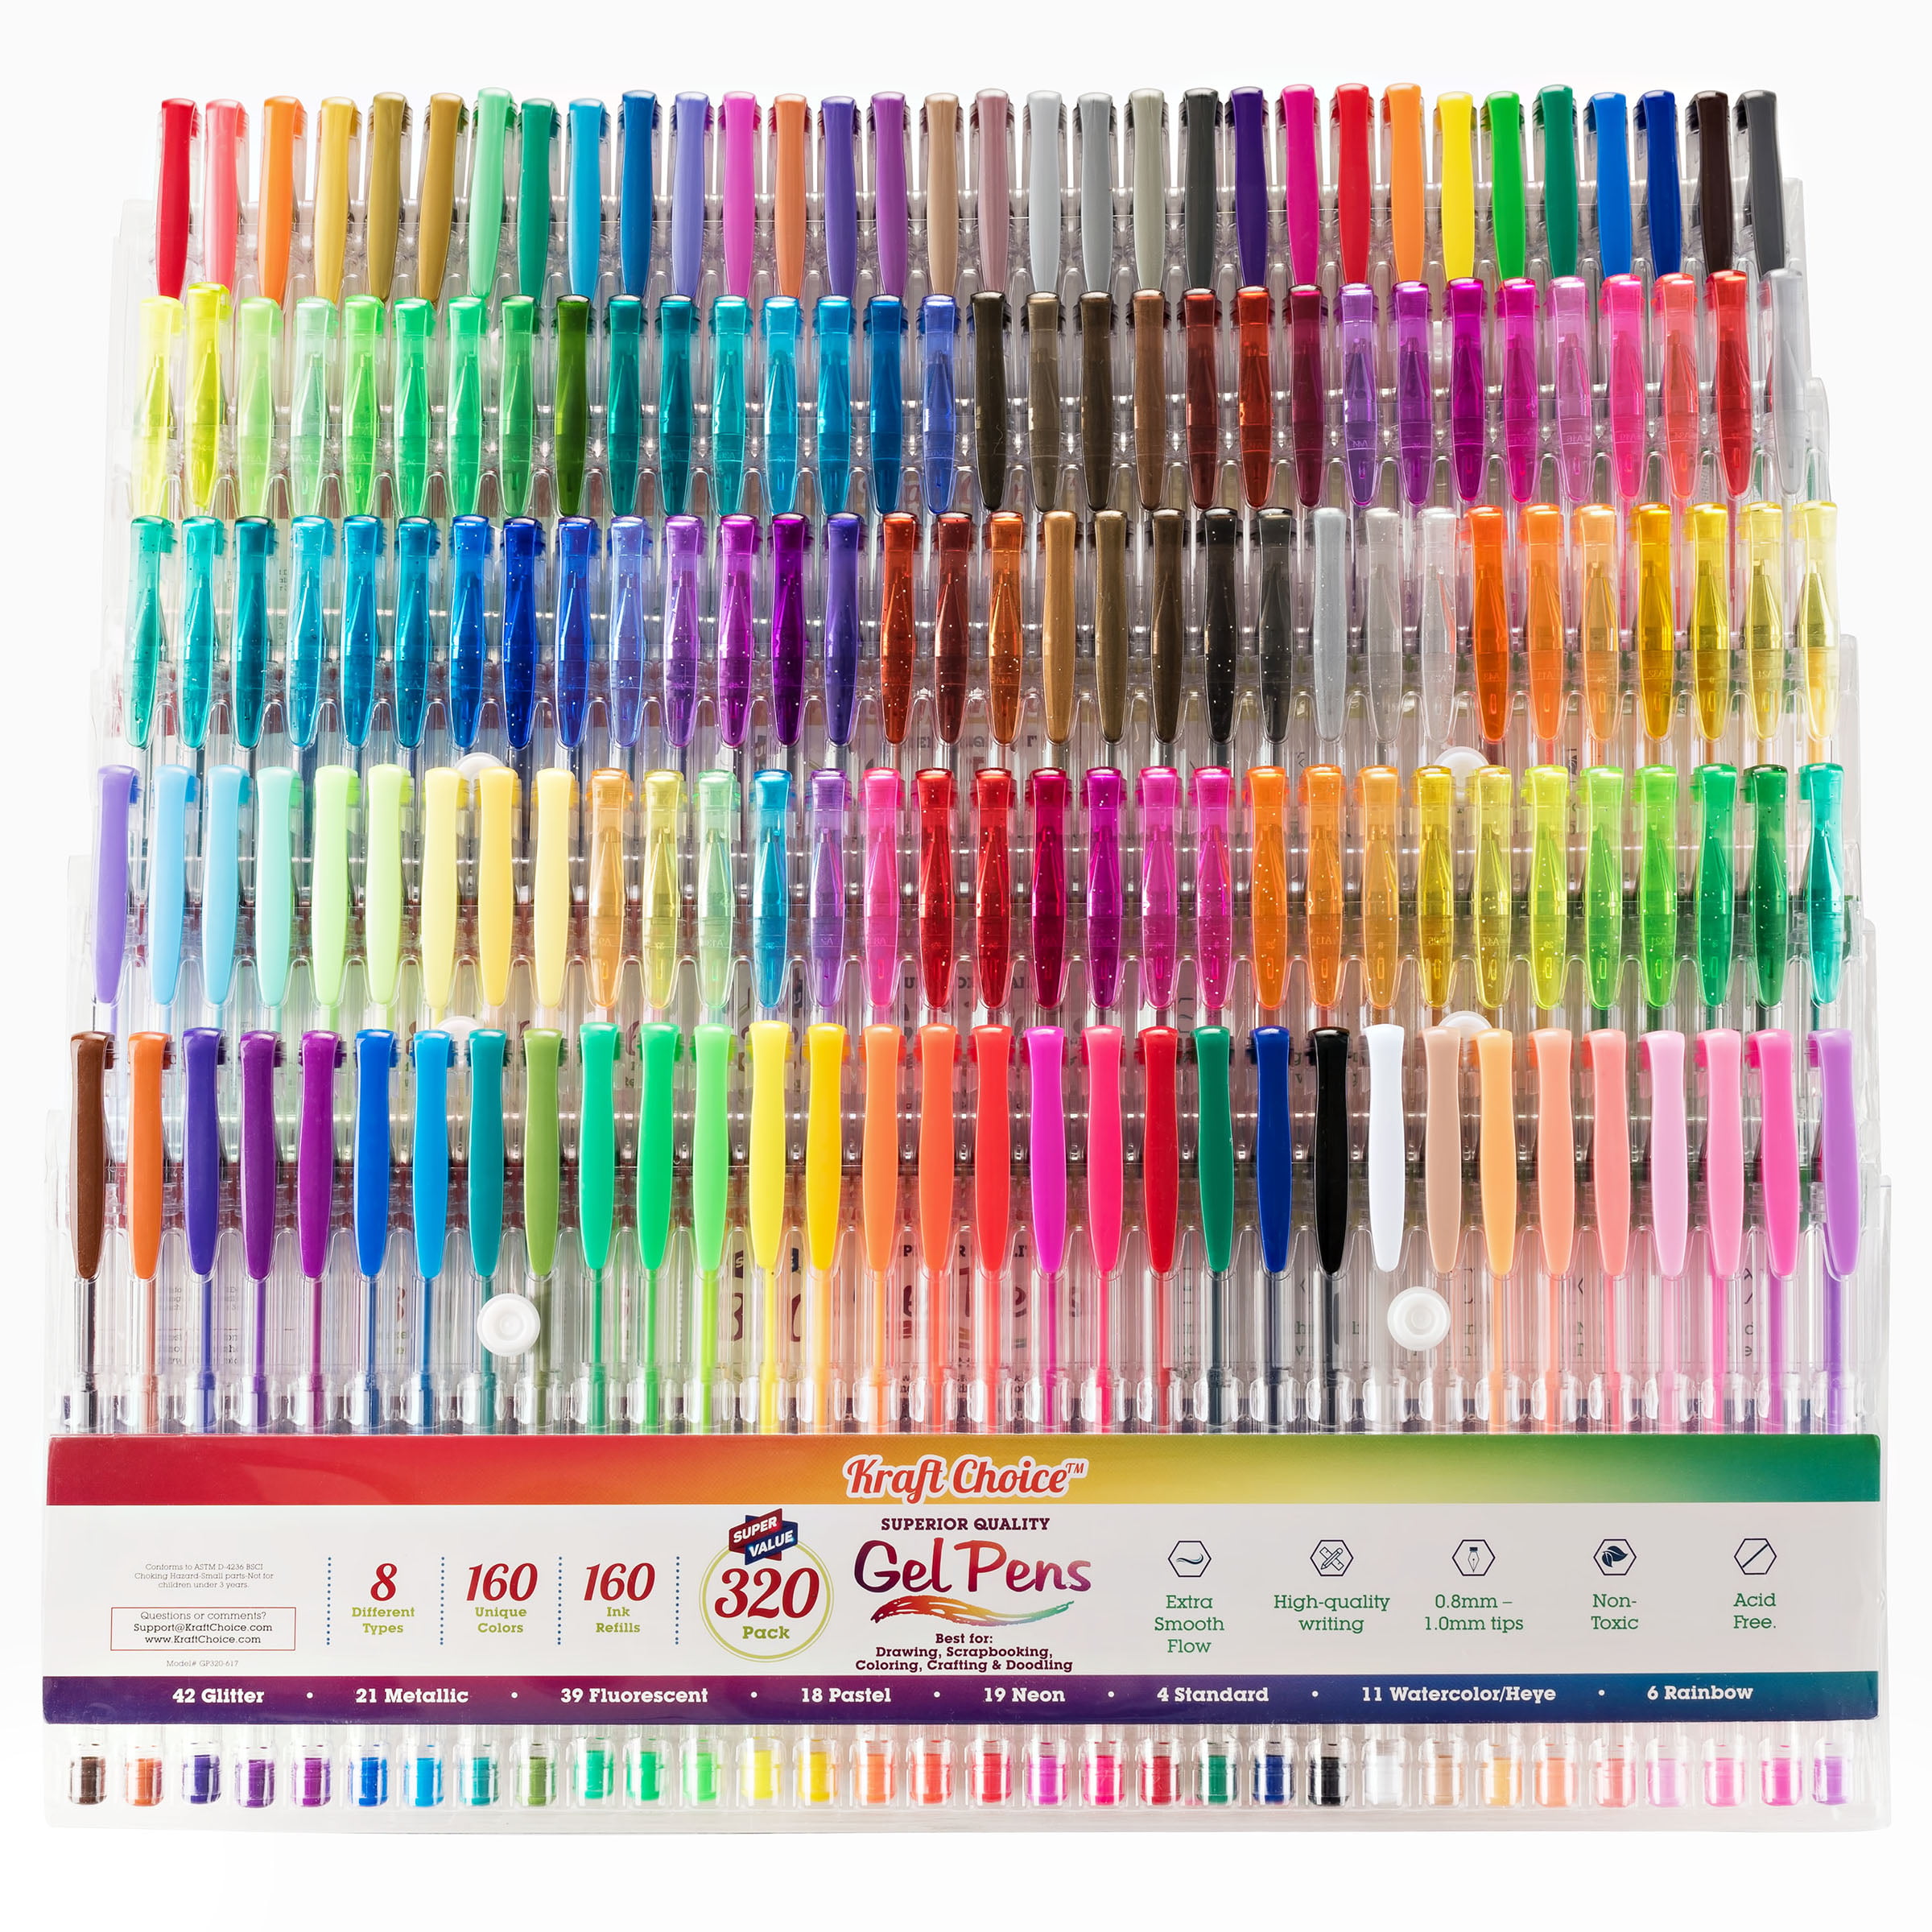 Aen Art Gel Pens 160 Colored Gel Pen Set with 160 Refills Giving 320  Brilliant Gel Colors Perfect for Adult Coloring Books Drawing Painting  Writing Marker